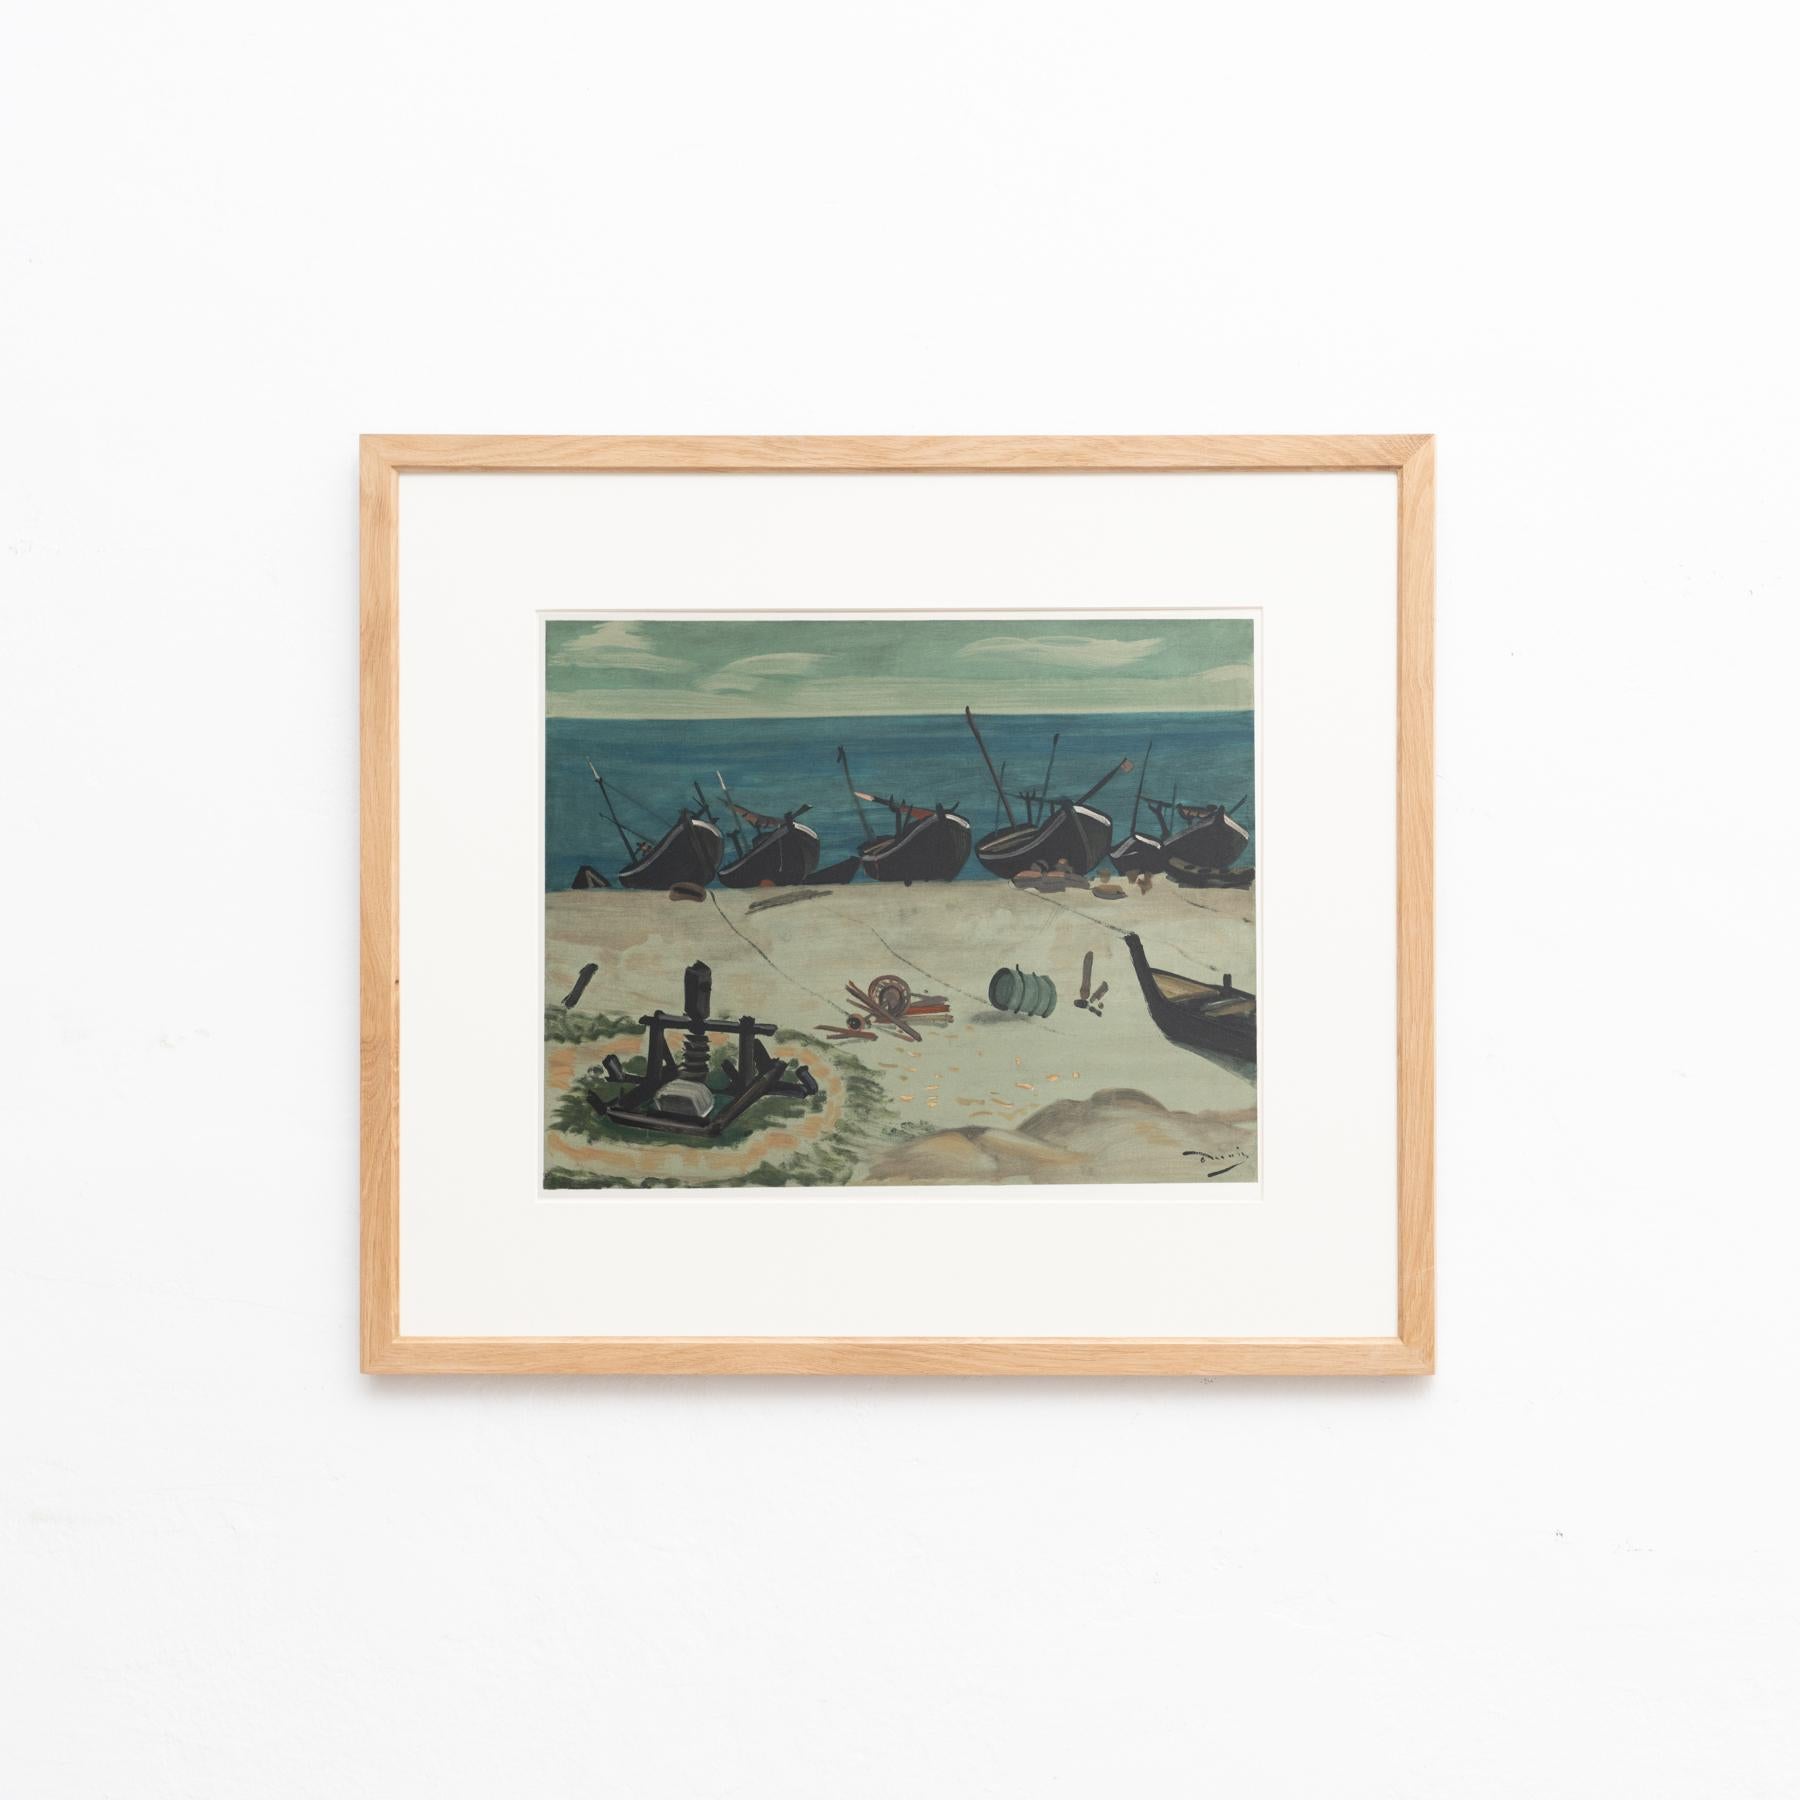 Original 'The small harbour' color lithograph by André Derain.

Lithograph printed from an original painting made by the author in France, circa 1951.

Published by Mourlot in Collection Pierre Levy in 1970, Paris. 

Framed and signed in the